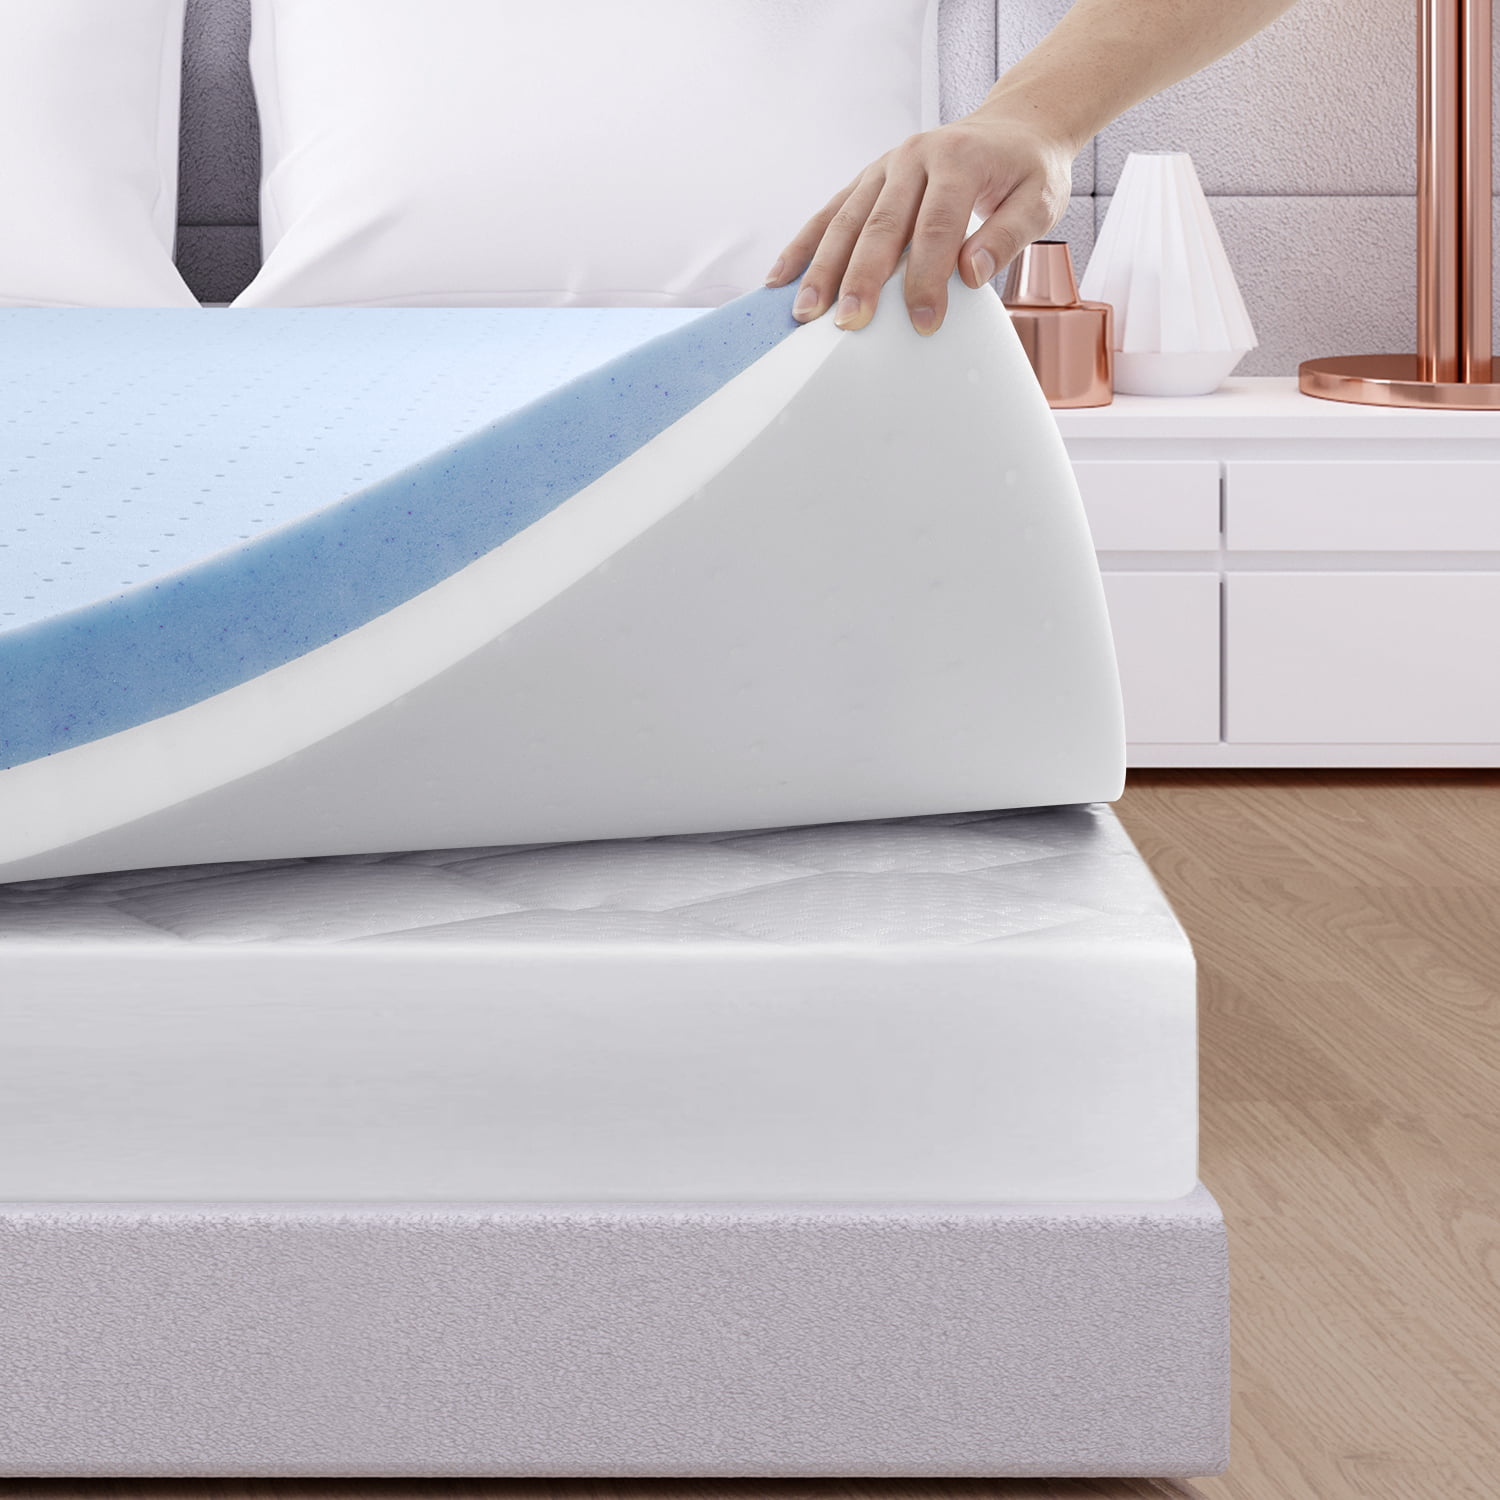 BedStory Full Mattress Topper, 3 inch Memory Foam Mattress Topper,  Gel-Infused Firm Bed Topper with Anti-Slip Removable&Breathable Cover for  Back